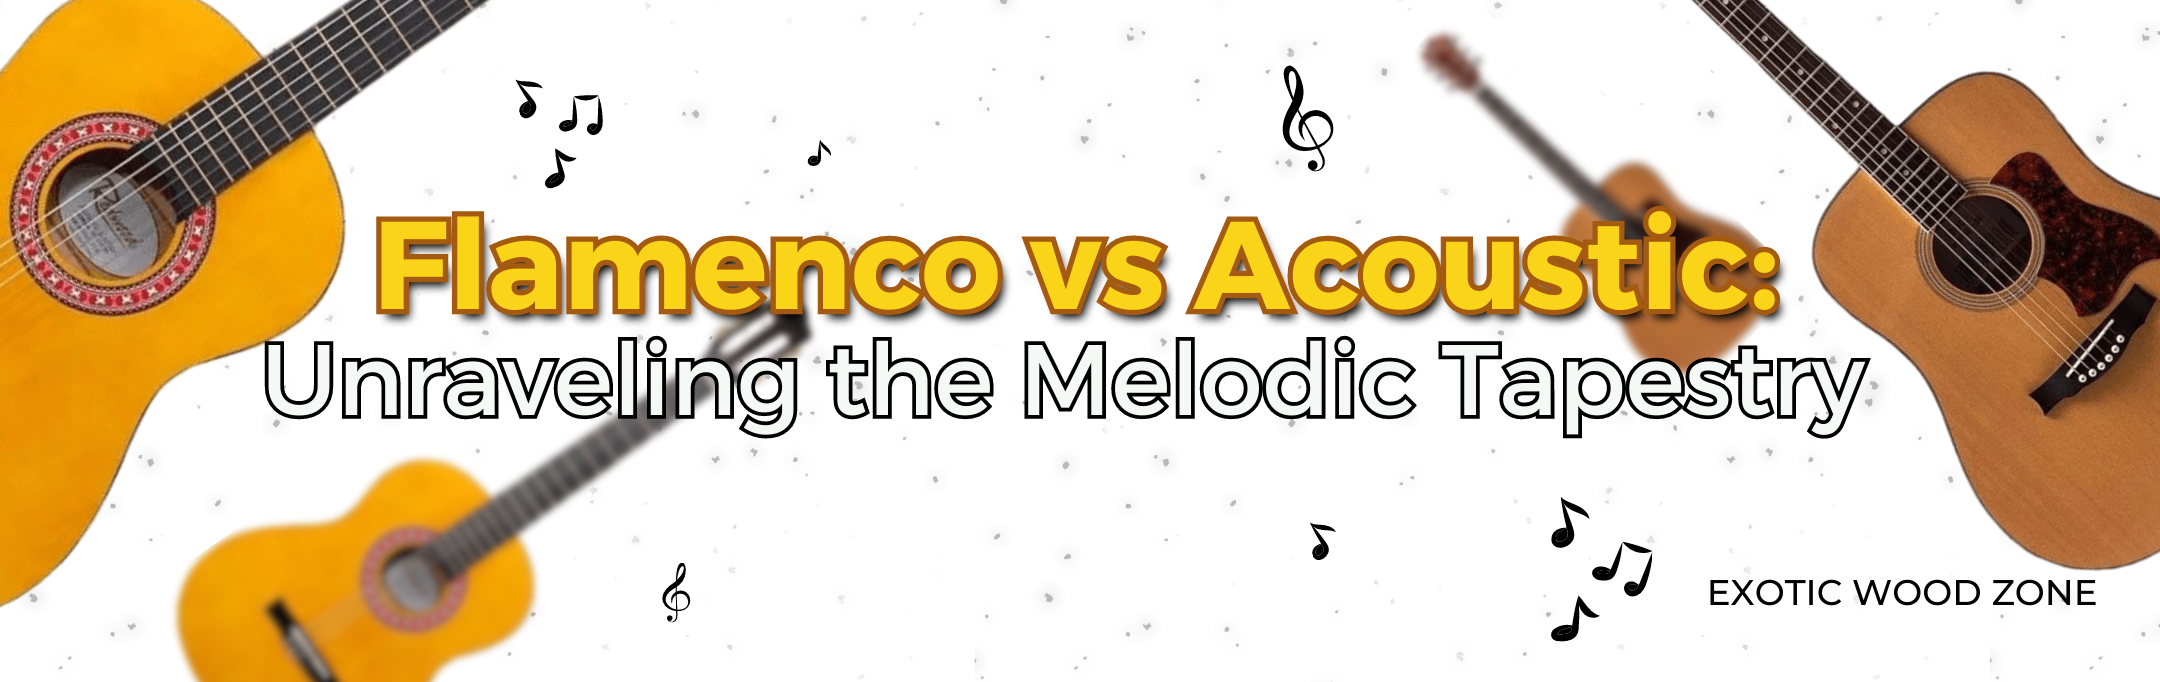 Flamenco VS Acoustic: Unraveling the Melodic Tapestry